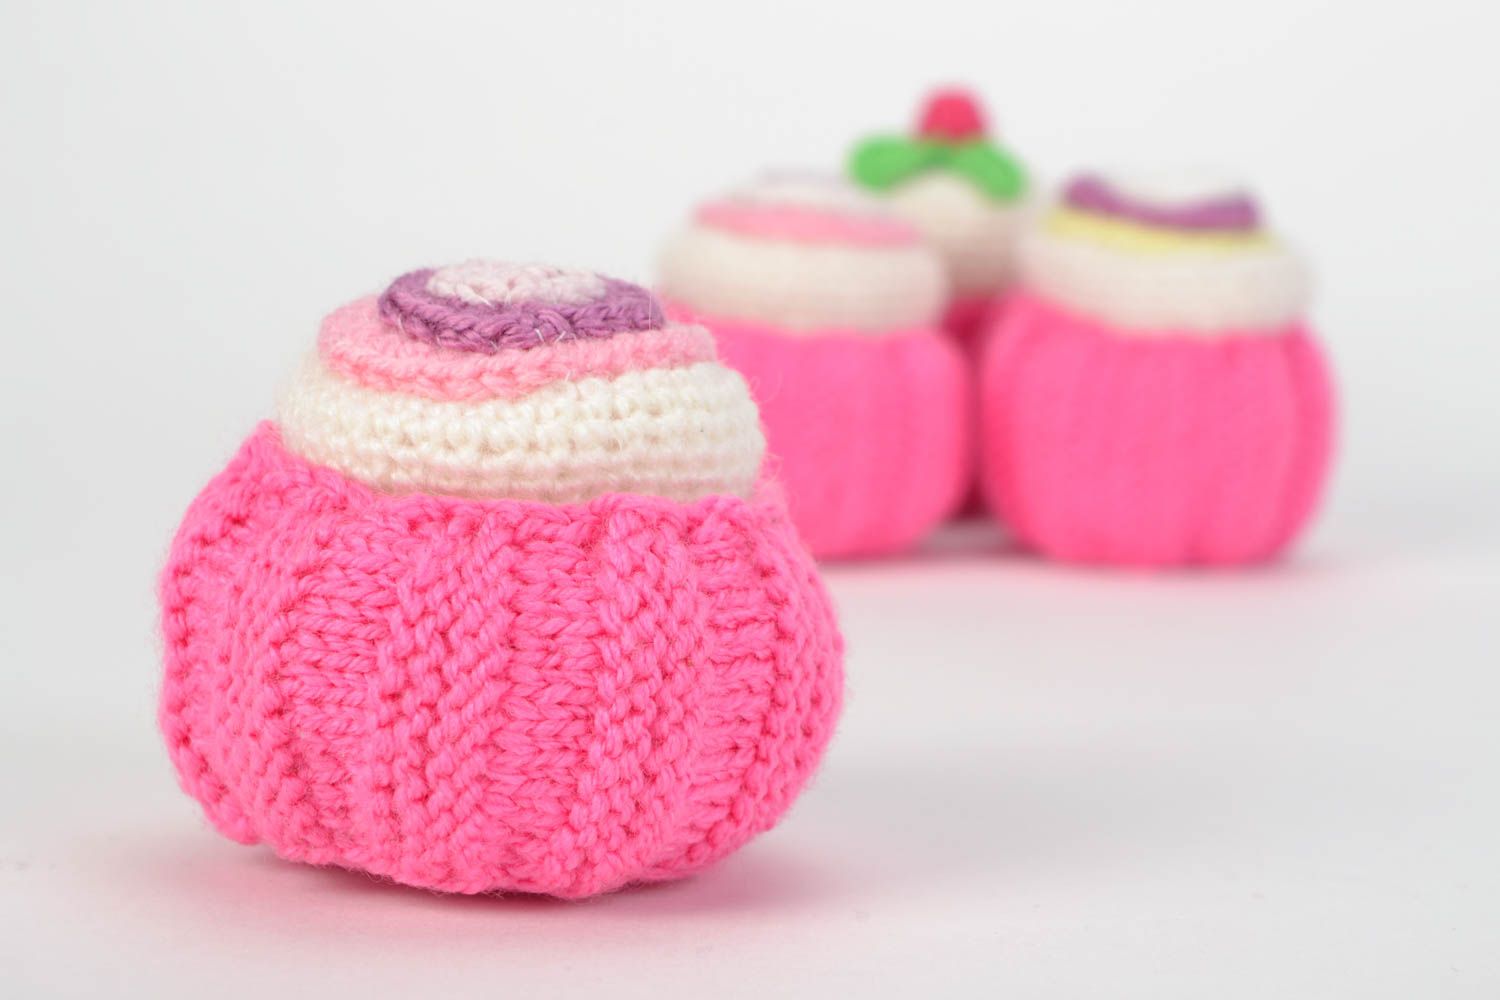 Small pink soft handmade crochet cake for children and home decor photo 1